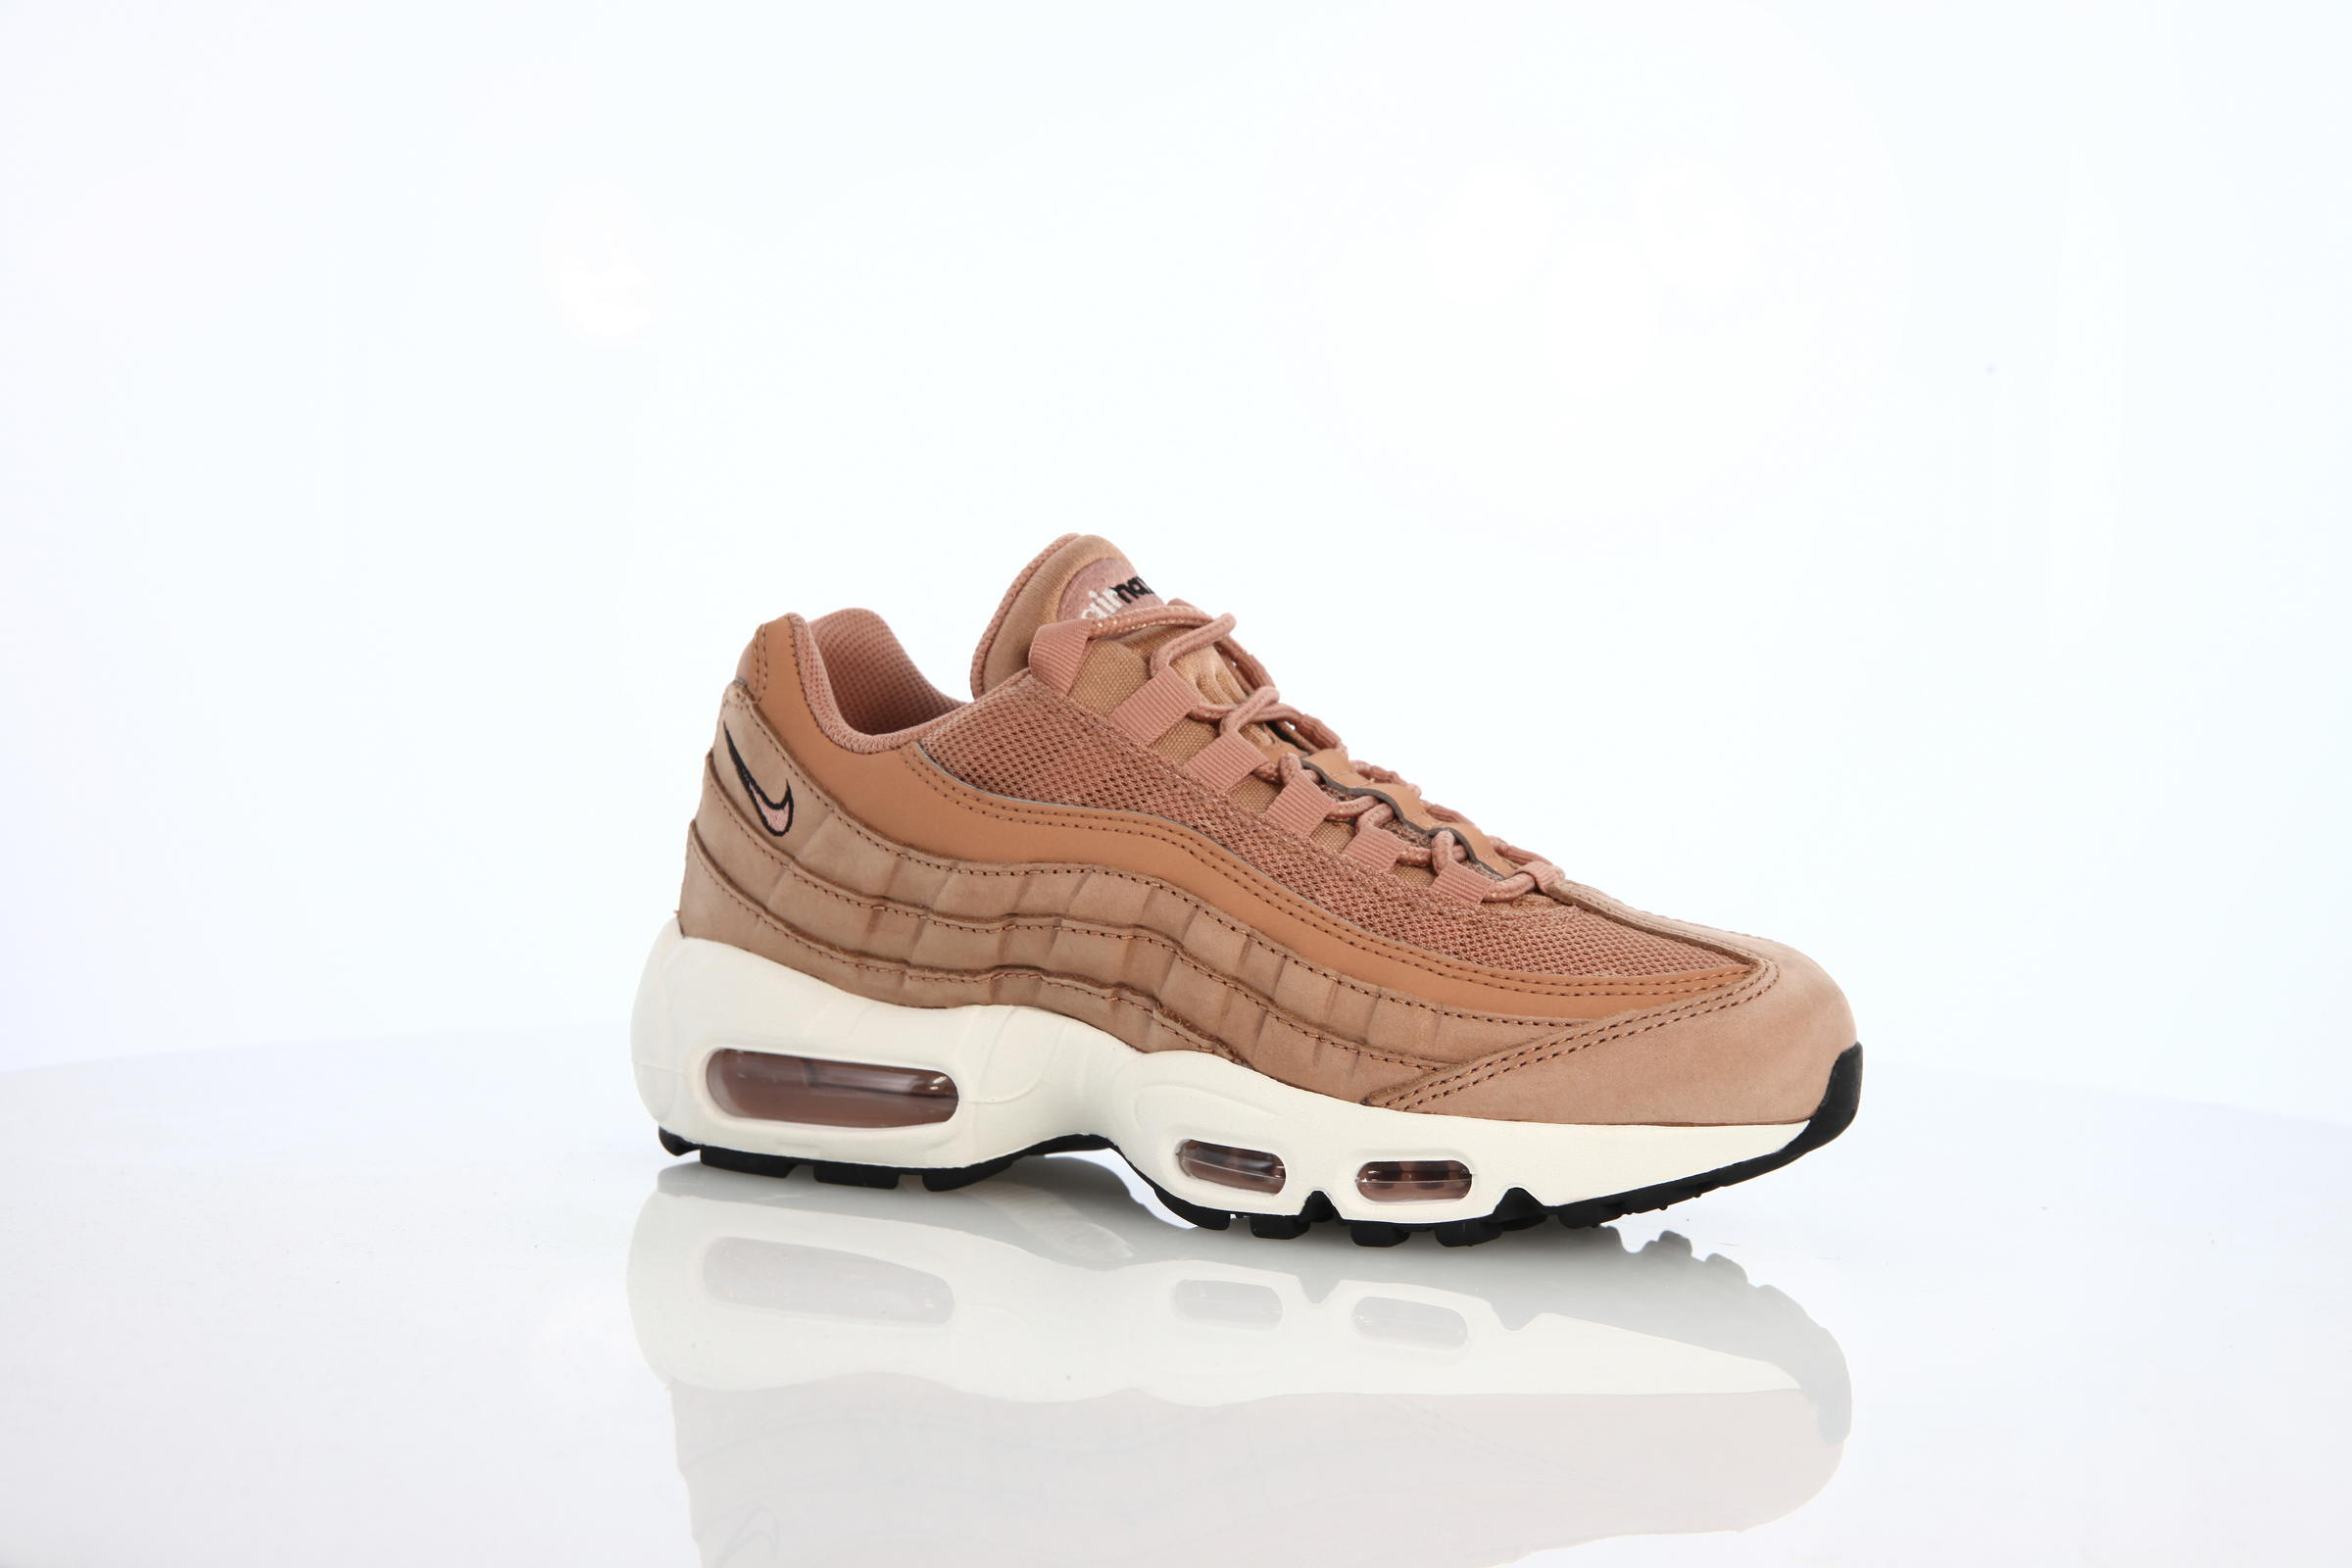 Nike Wmns Air Max 95 "Dusted Clay"